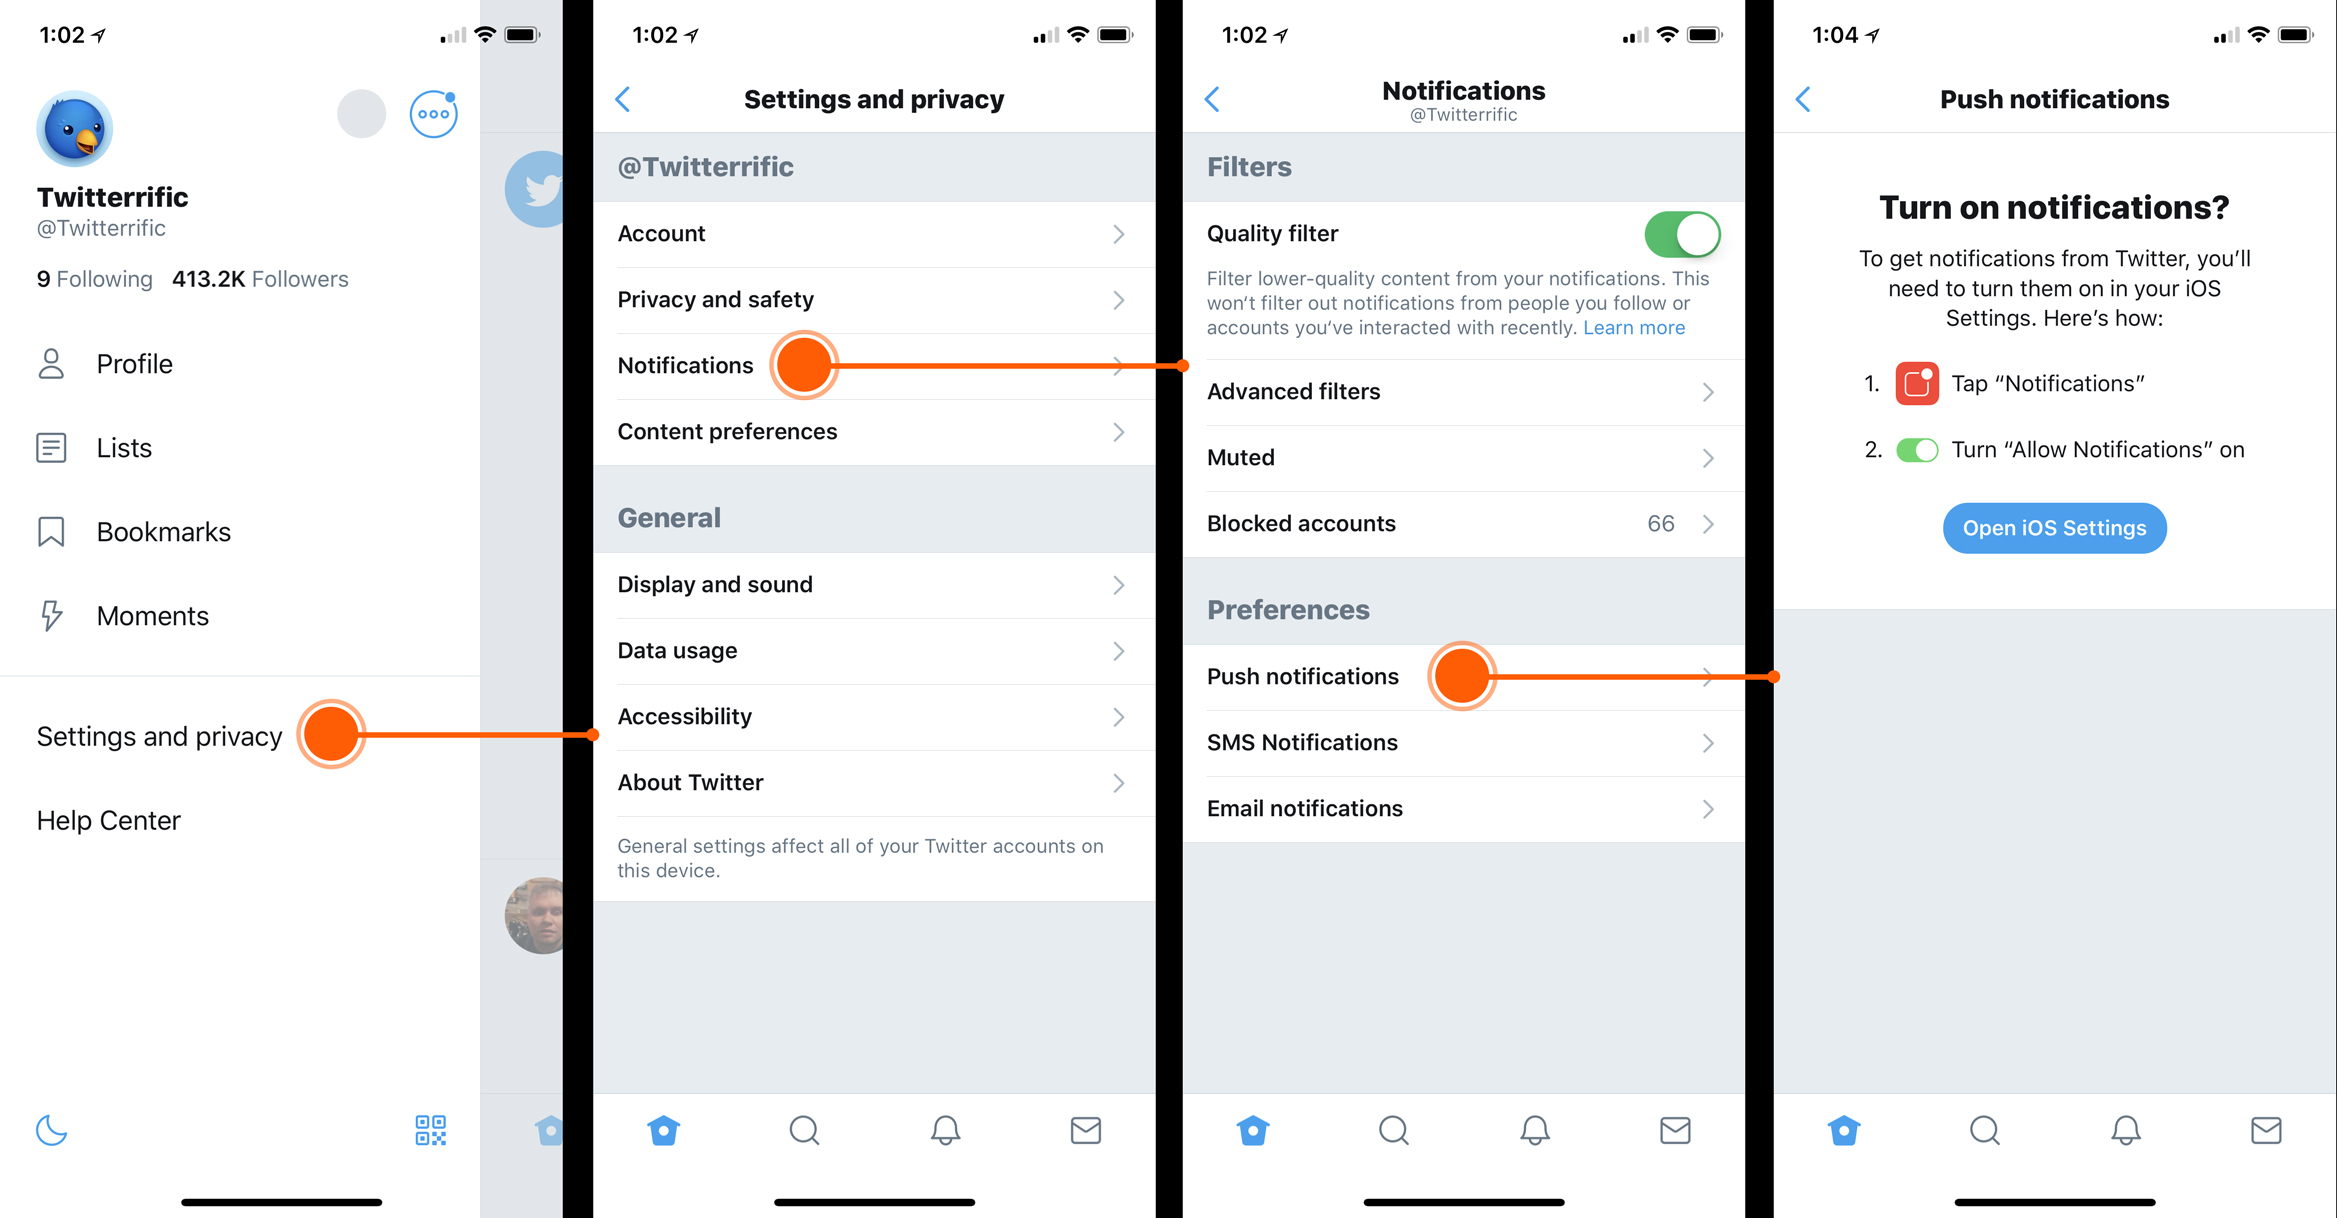 The flow of how to activate push notifications within the official app. Open Settings and Privacy - Notifications - Push Notifications - Turn on Notifications